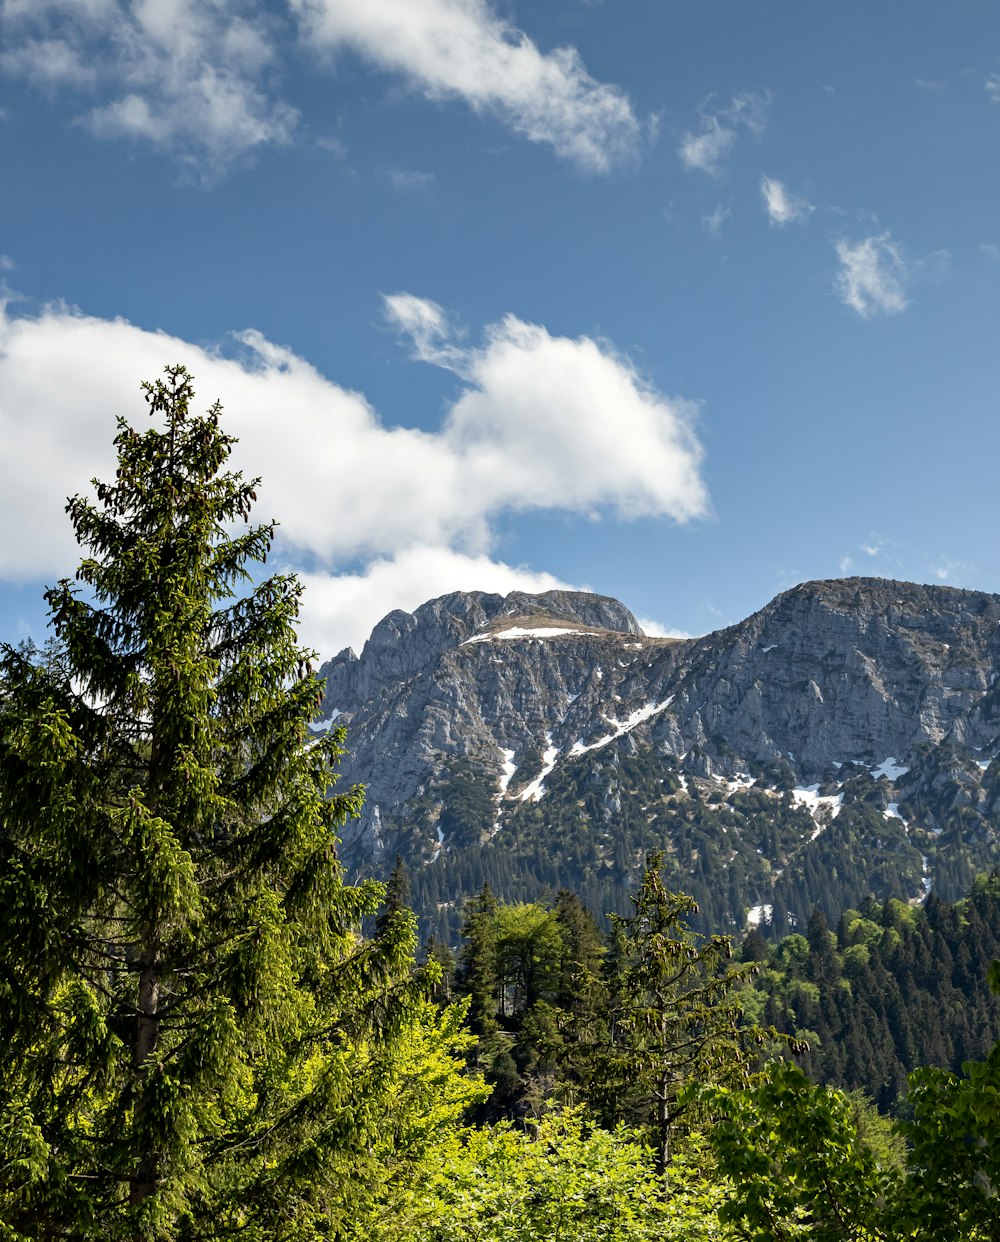 landscape photography of green trees and mountain